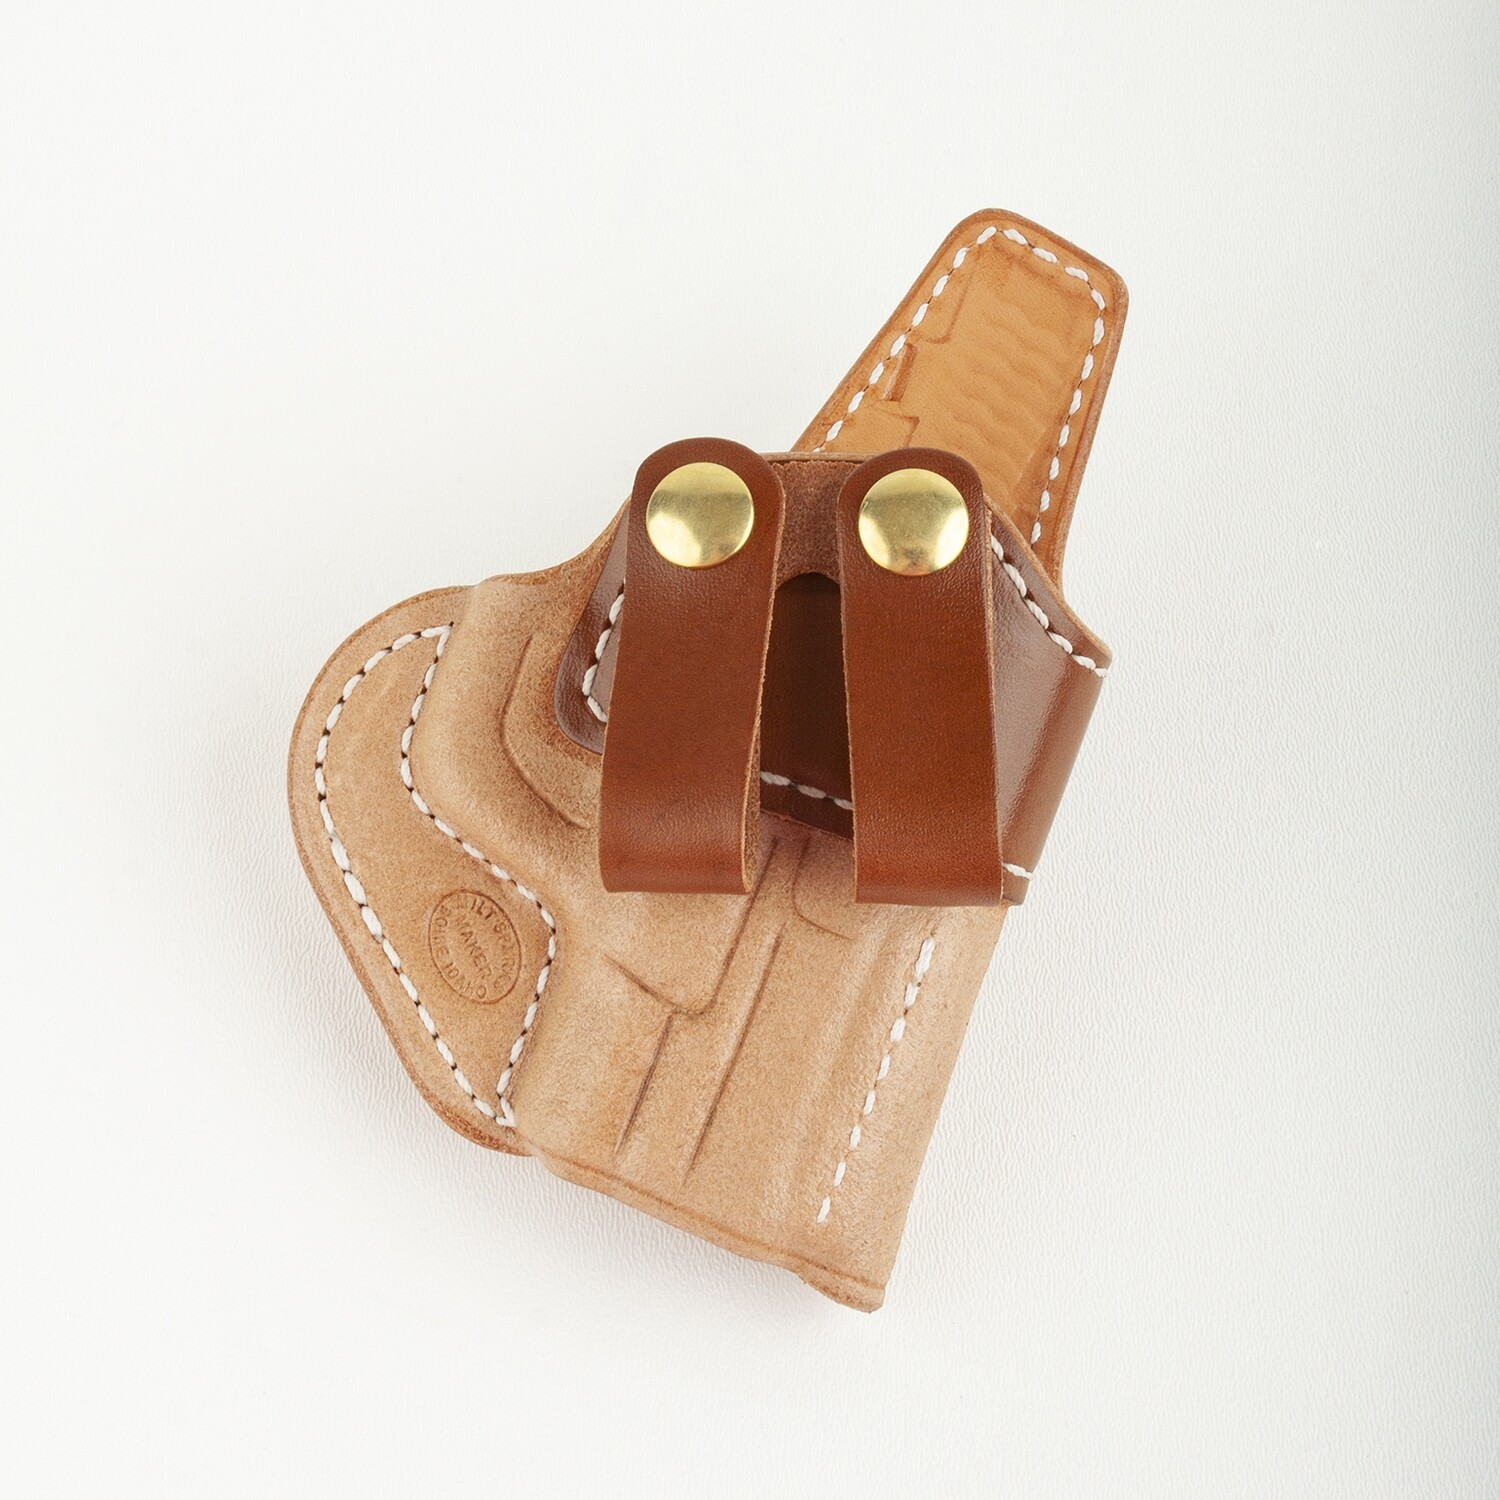 Summer Special 2 - S&W Shield 9/40 (1.0 & 2.0), Natural Tan, 1.5